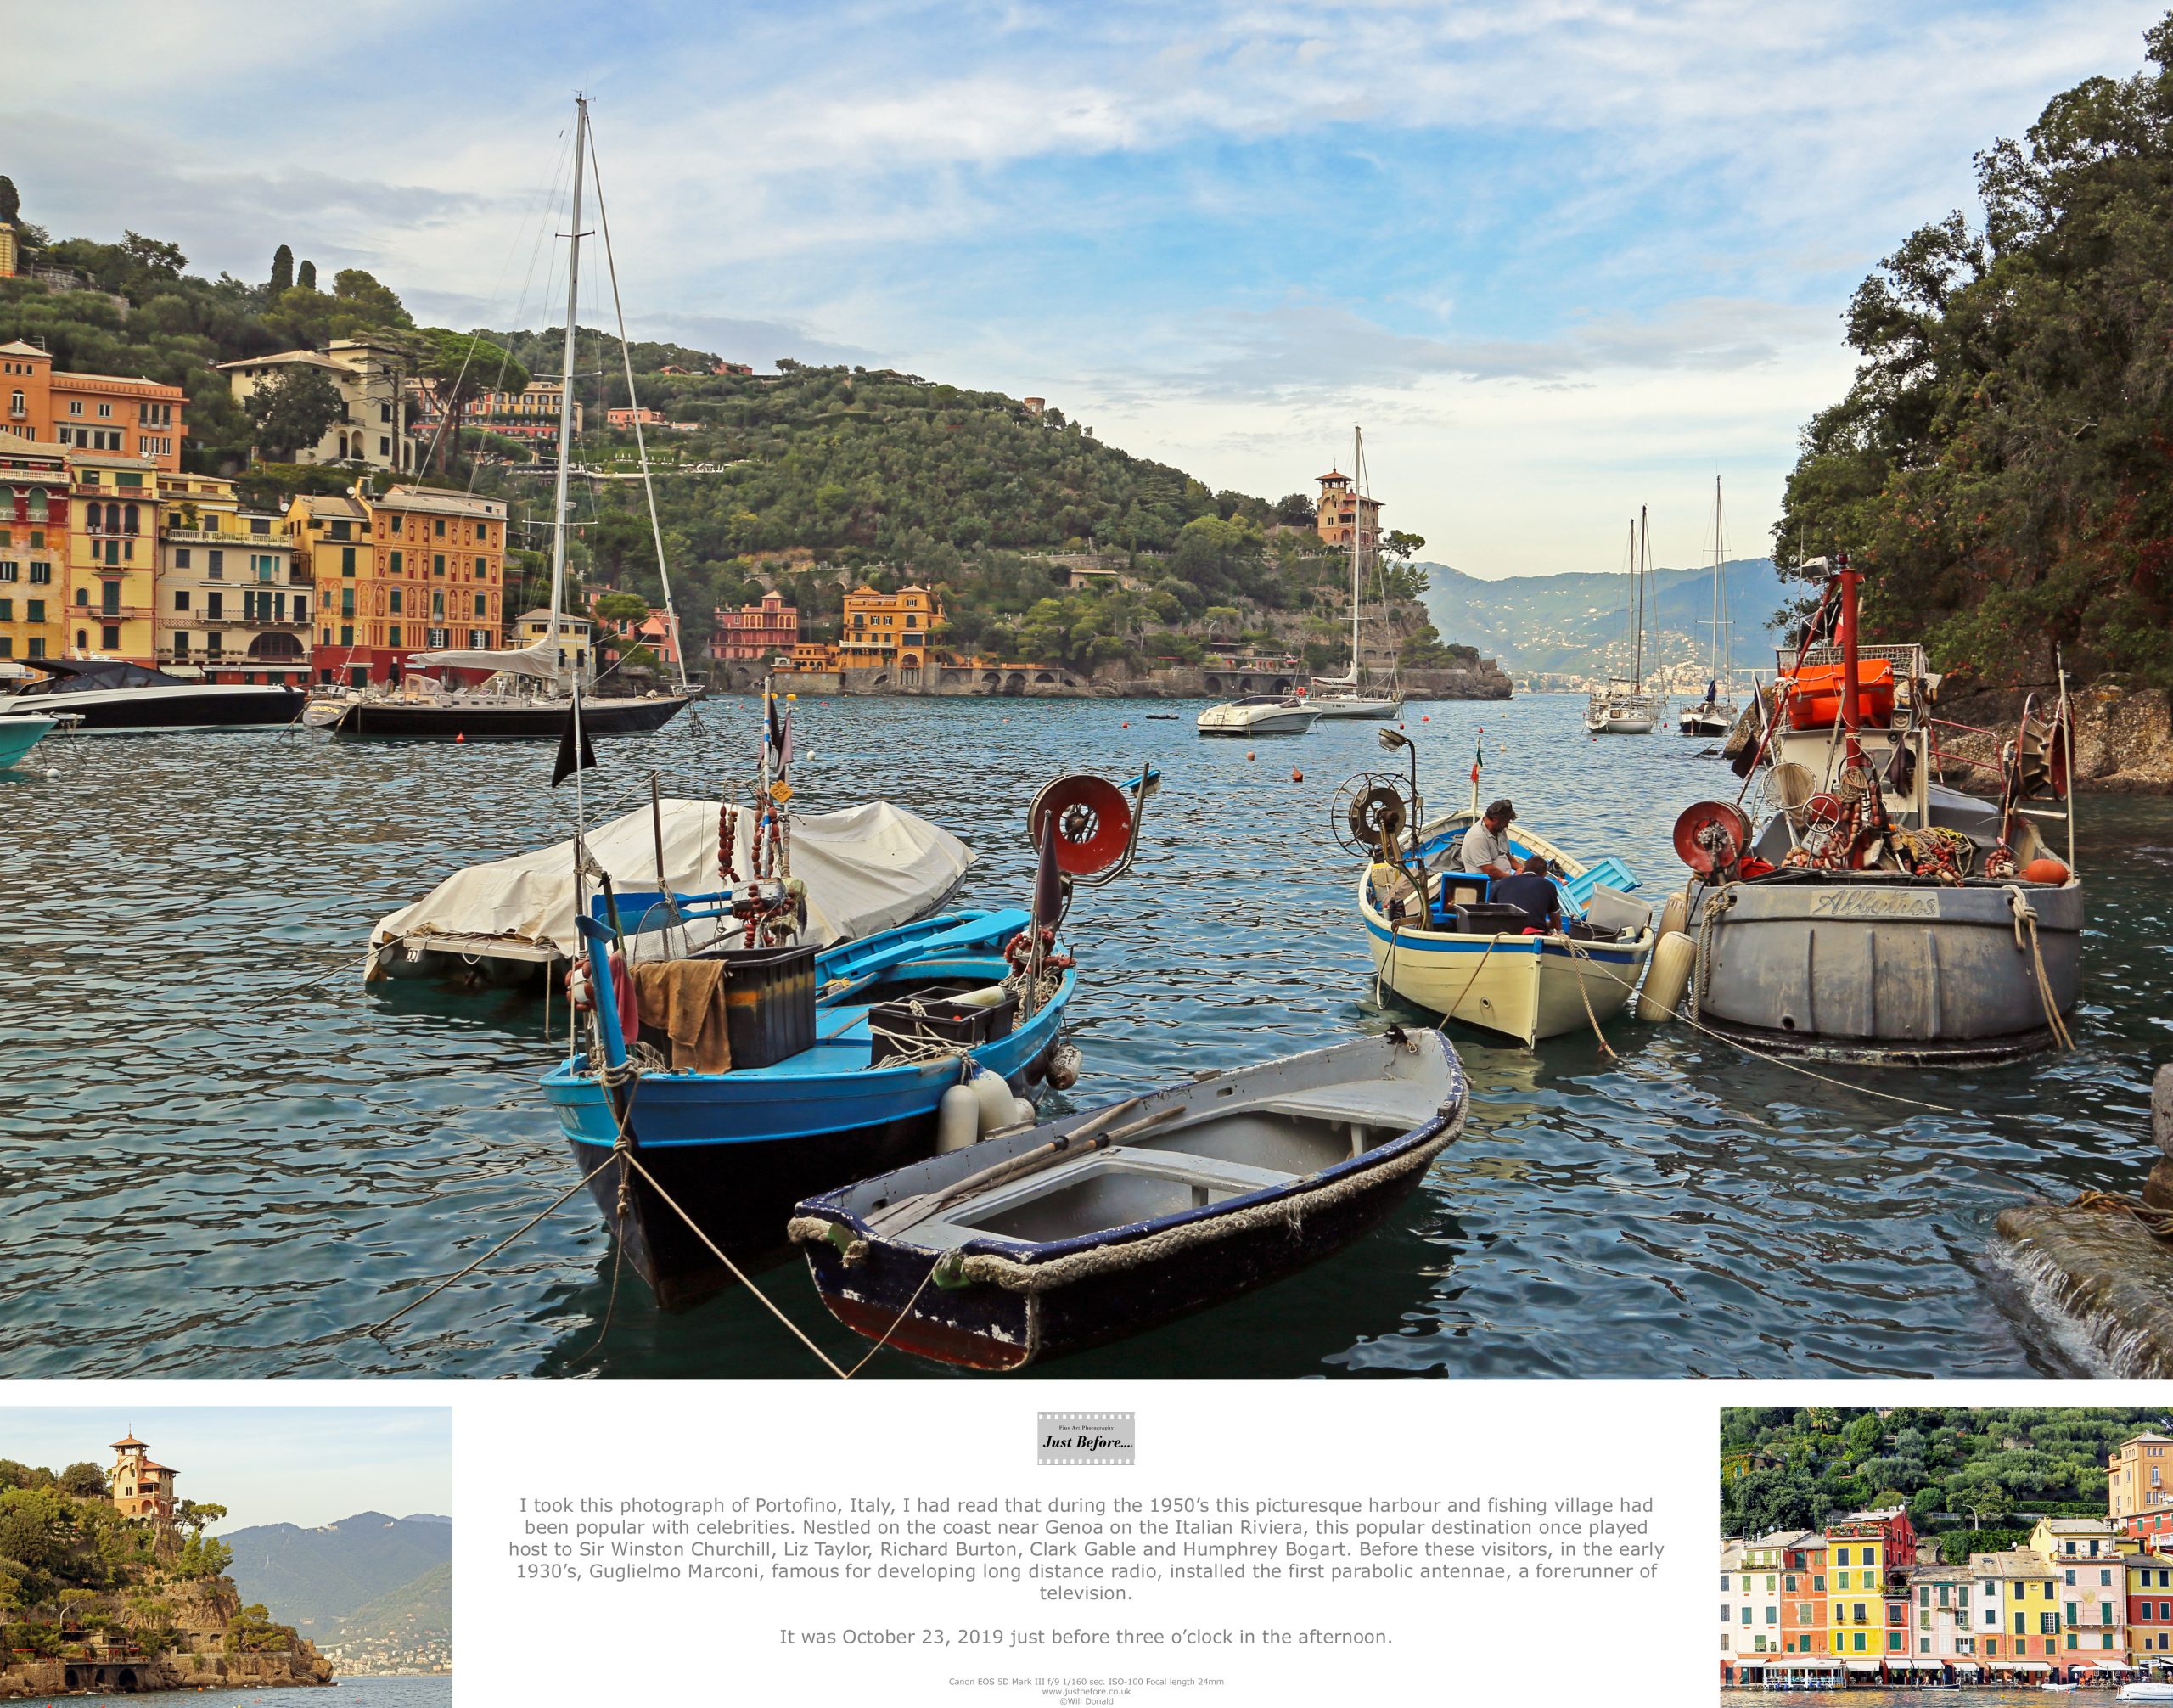 Collection of Photography of Portofino in Italy